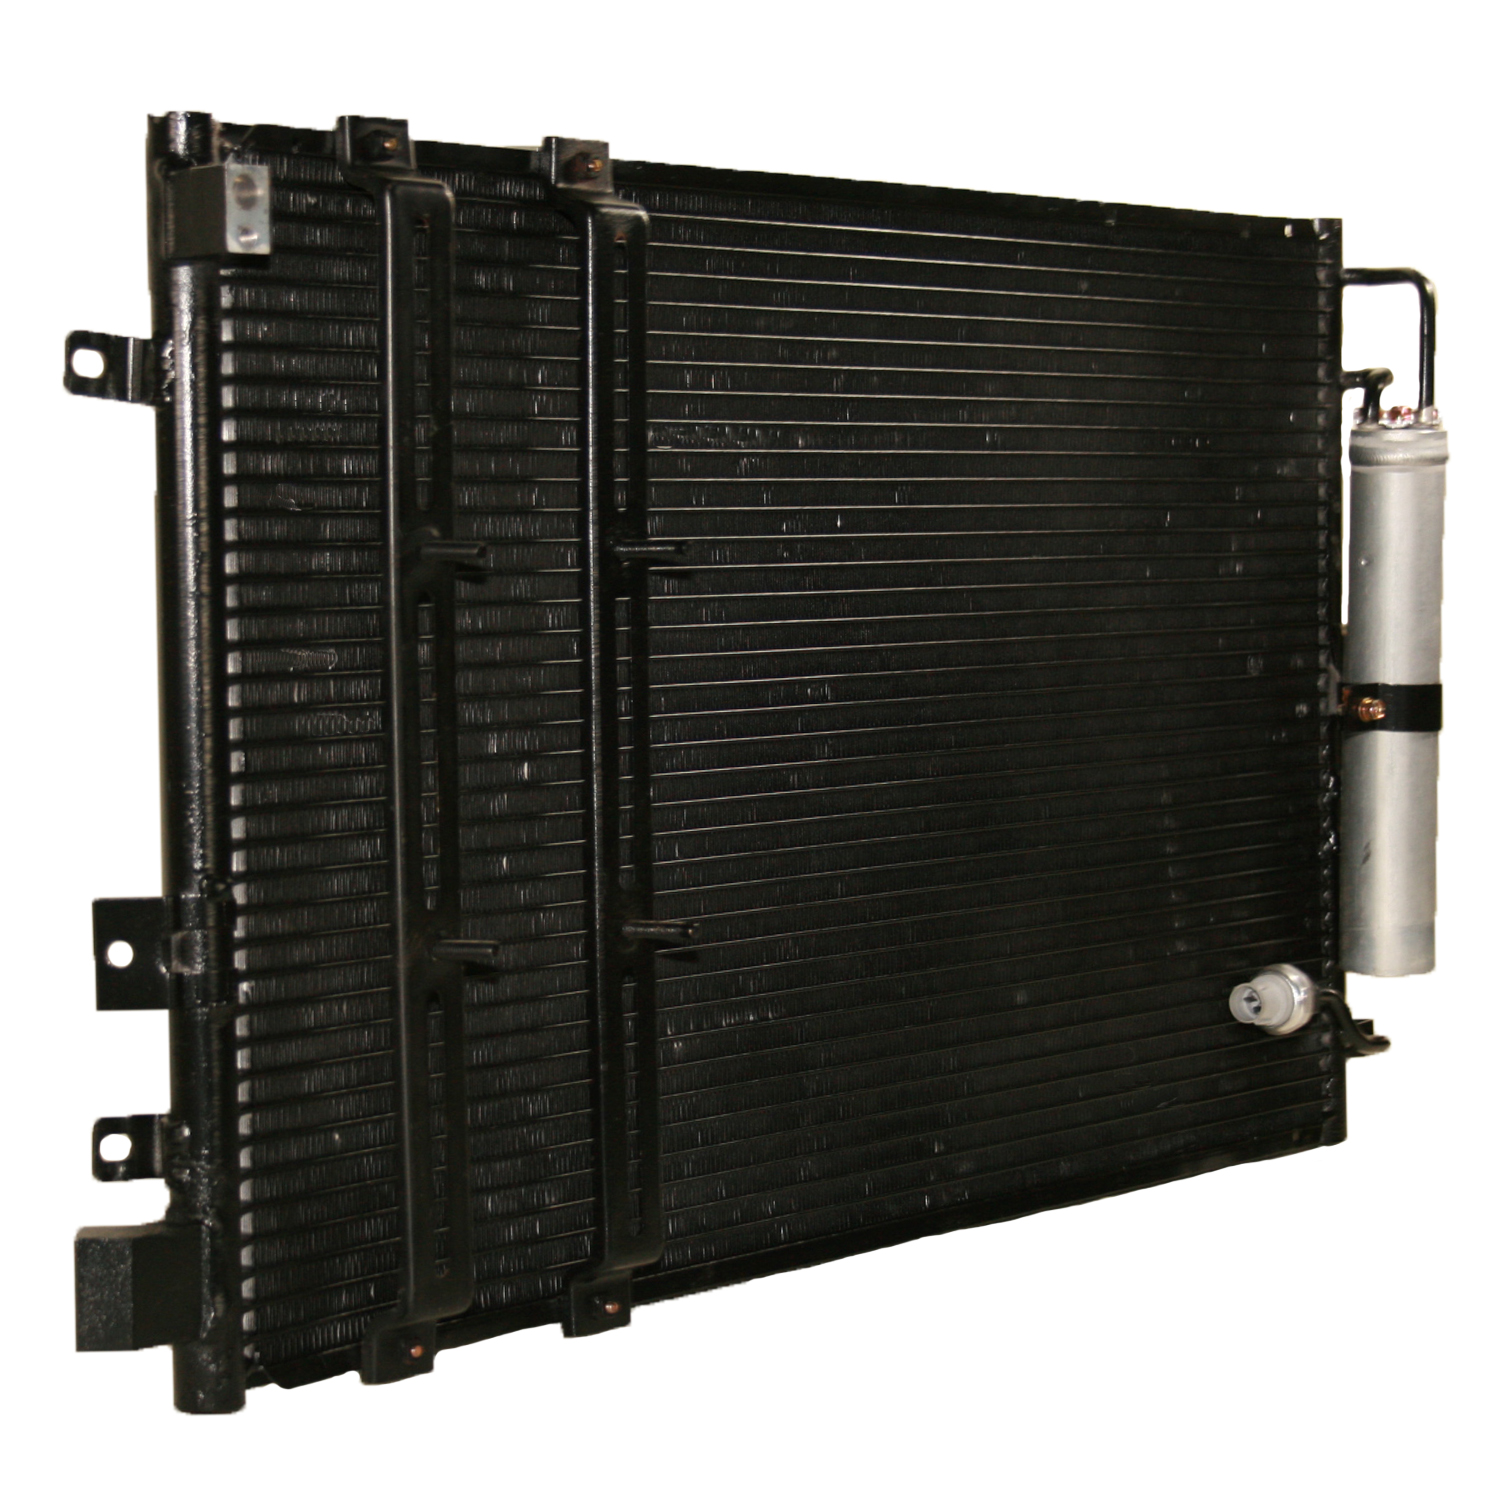 TCW Condenser 44-3104 New Product Image field_60b6a13a6e67c